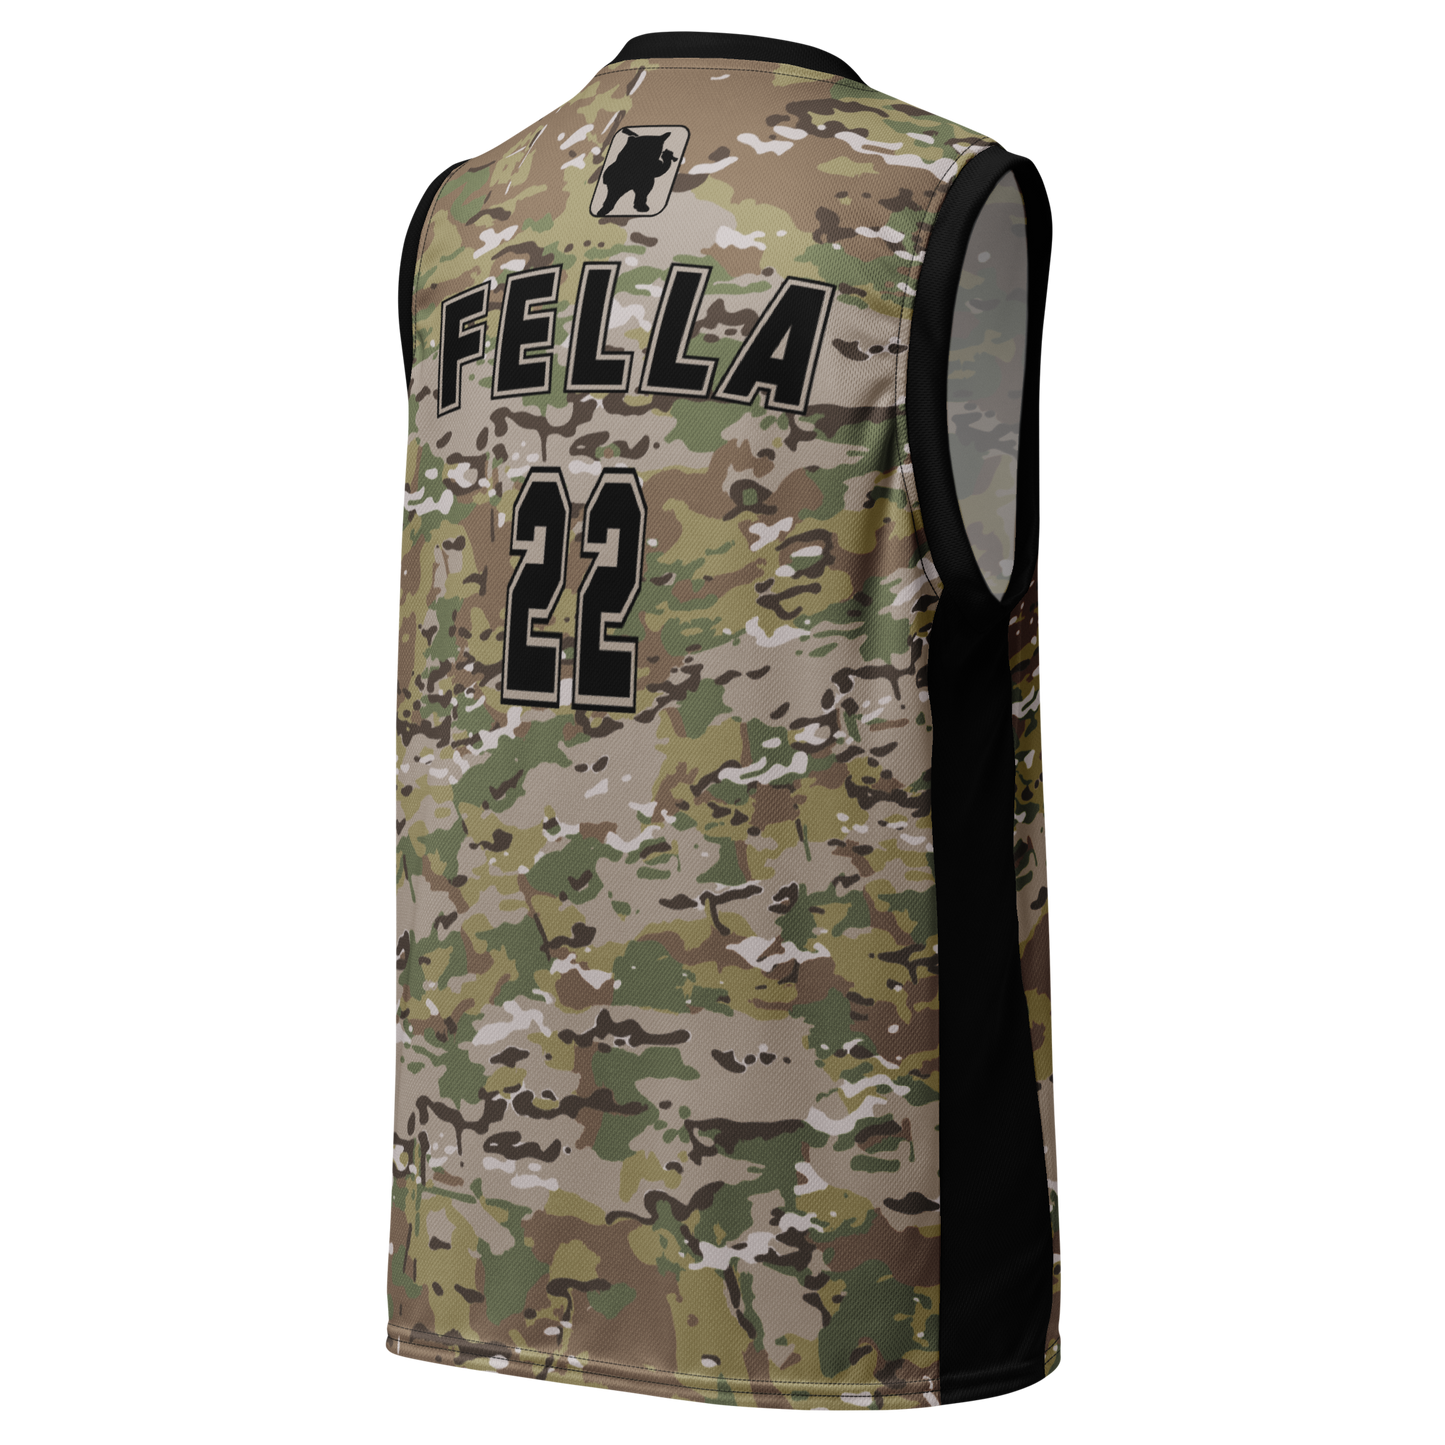 Spurs release photos of military-inspired camouflage jerseys 